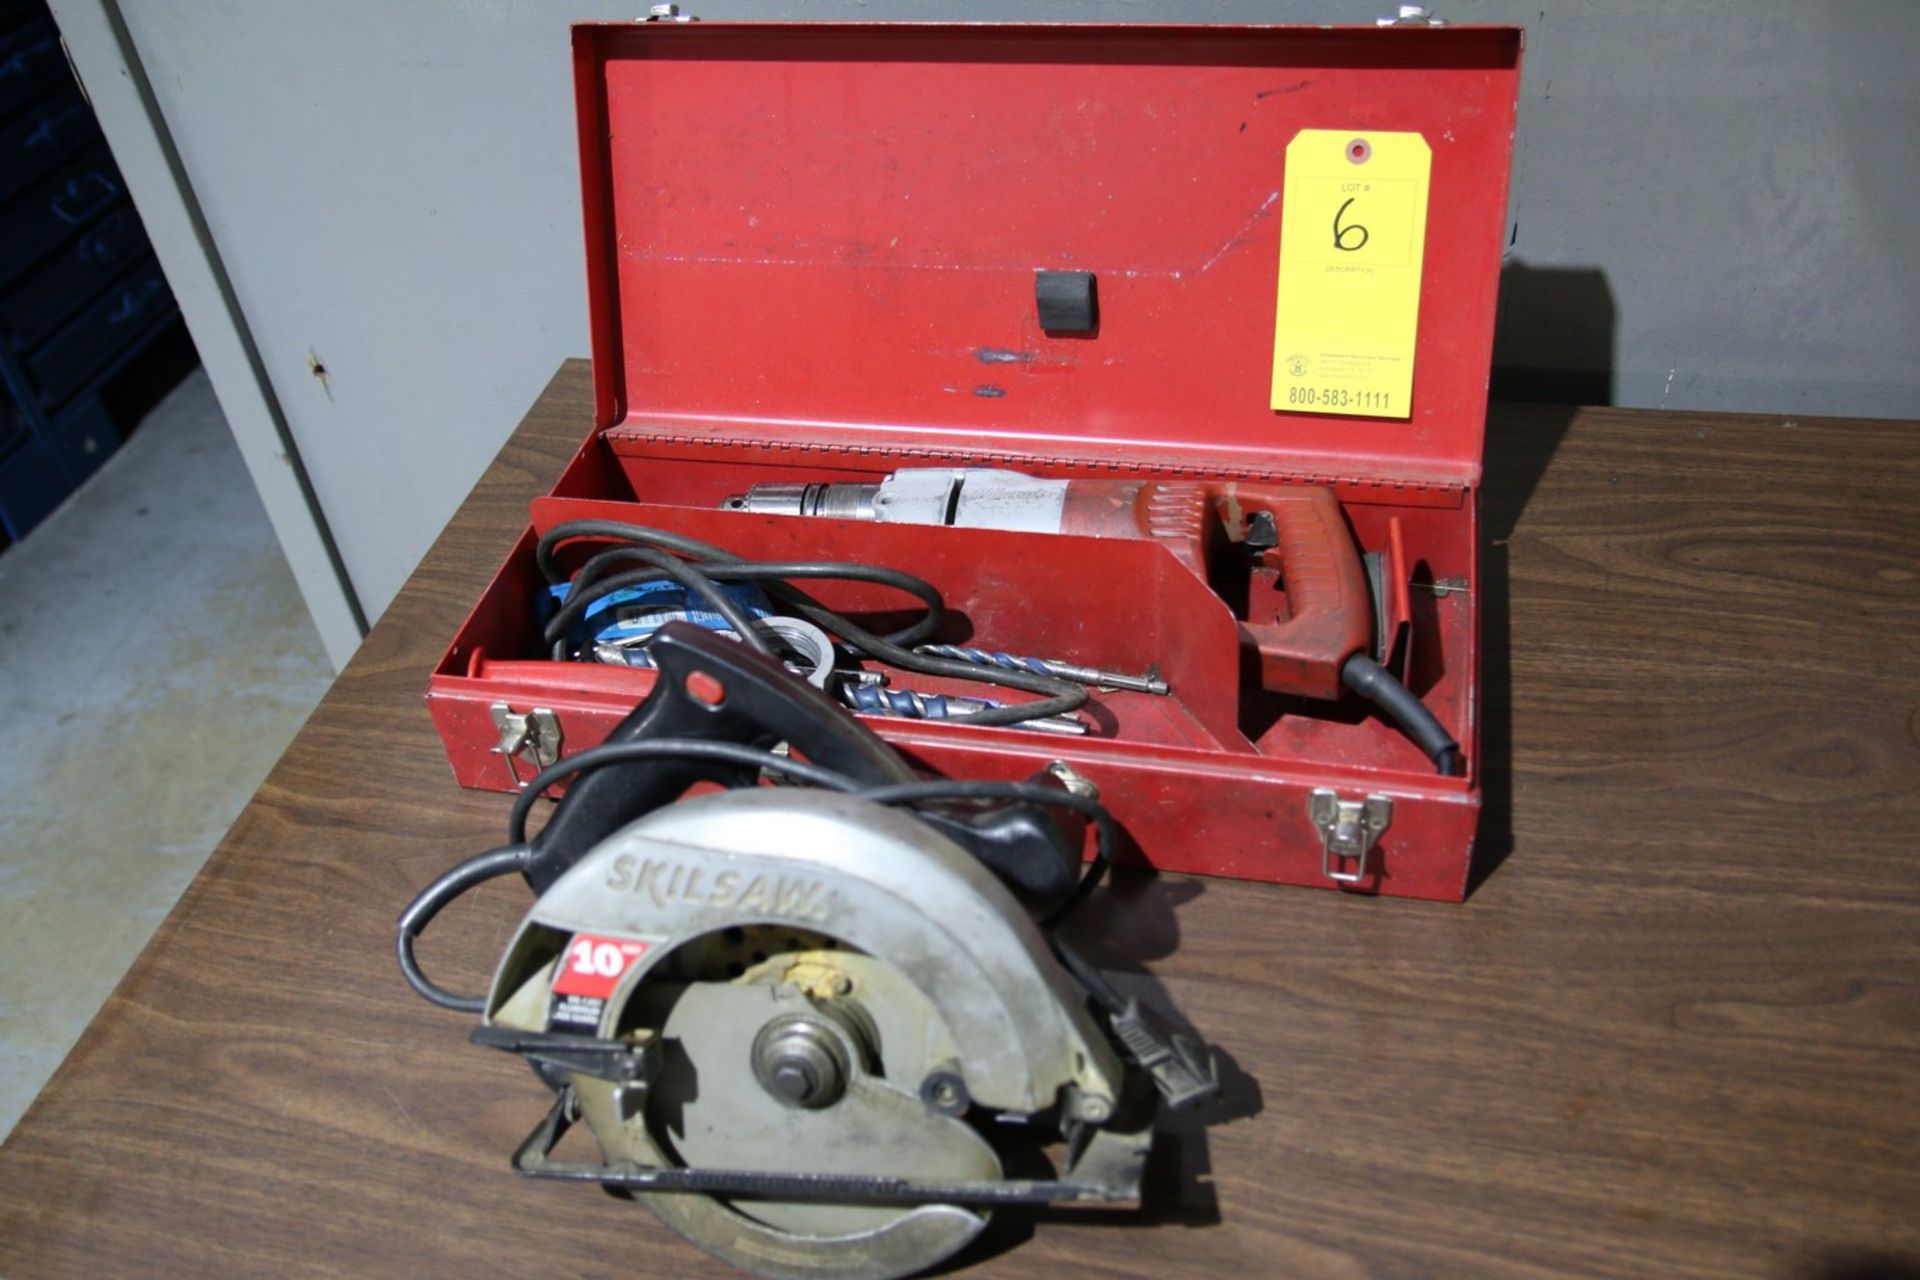 Lot of Hand Tools (1) Milwaukee Heavy Duty Hammer Drill and (1) Skilsaw Circular Saw